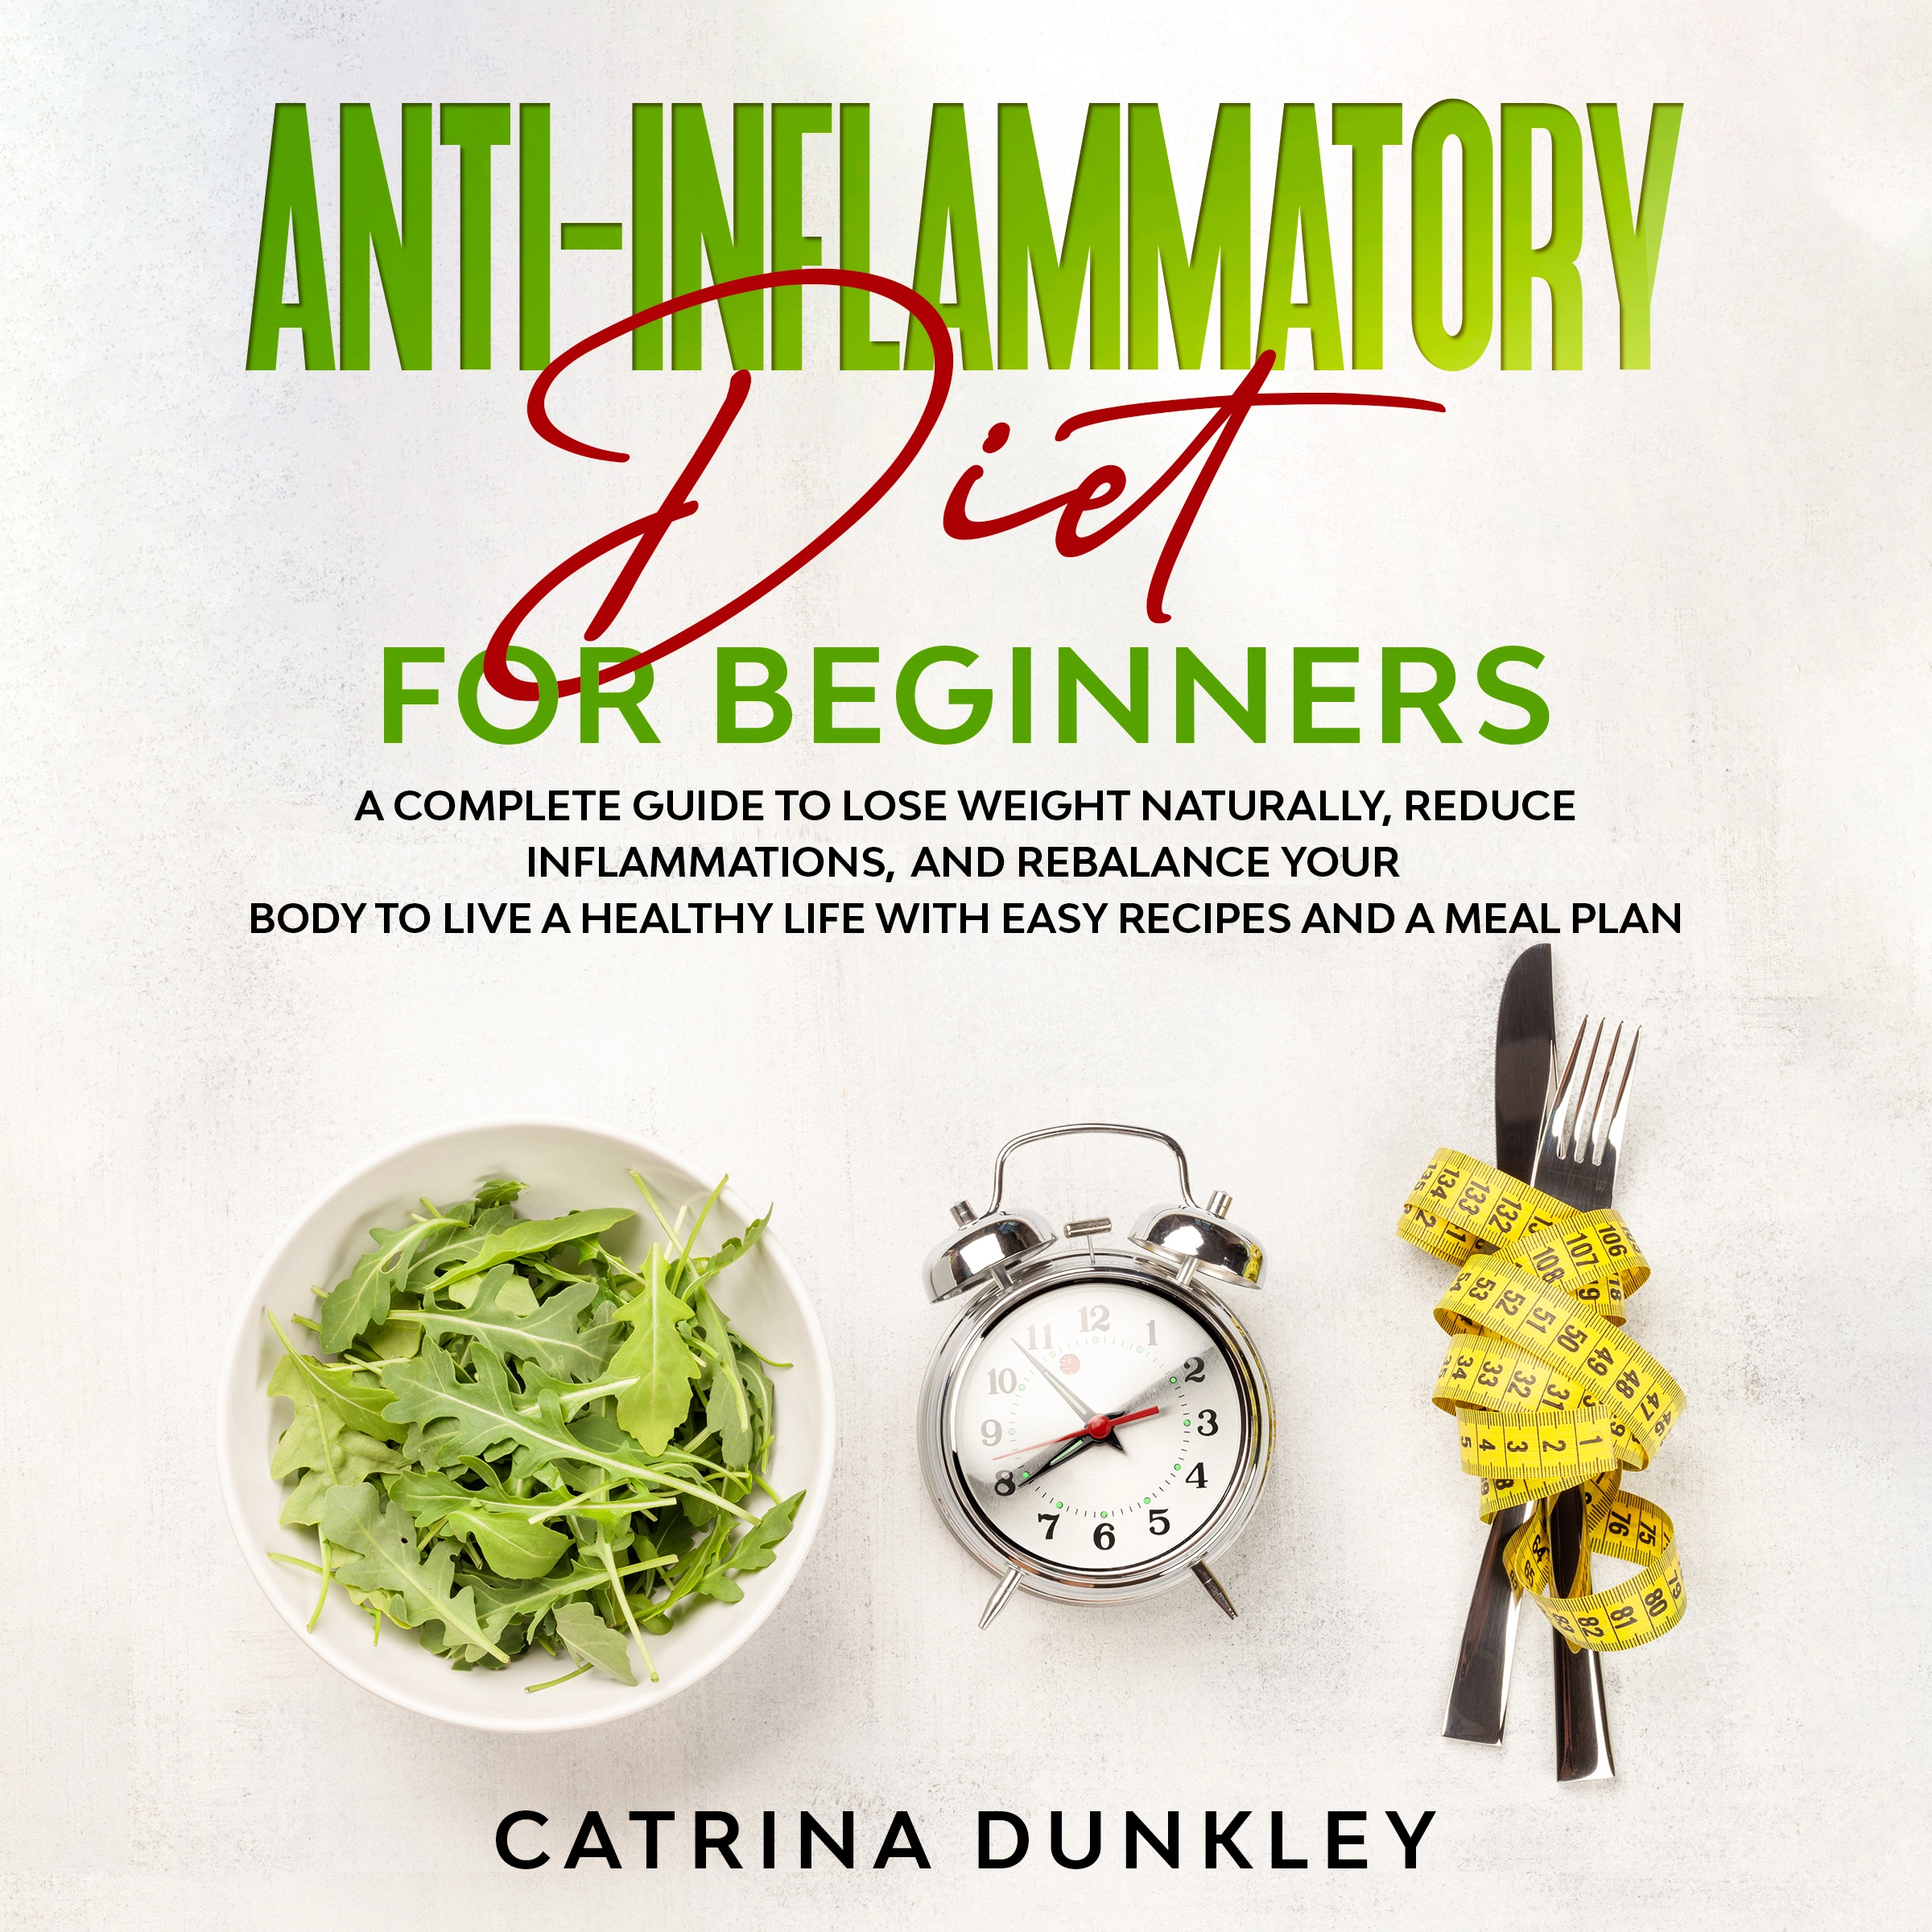 Anti-Inflammatory Diet for Beginners Audiobook by Catrina Dunkley